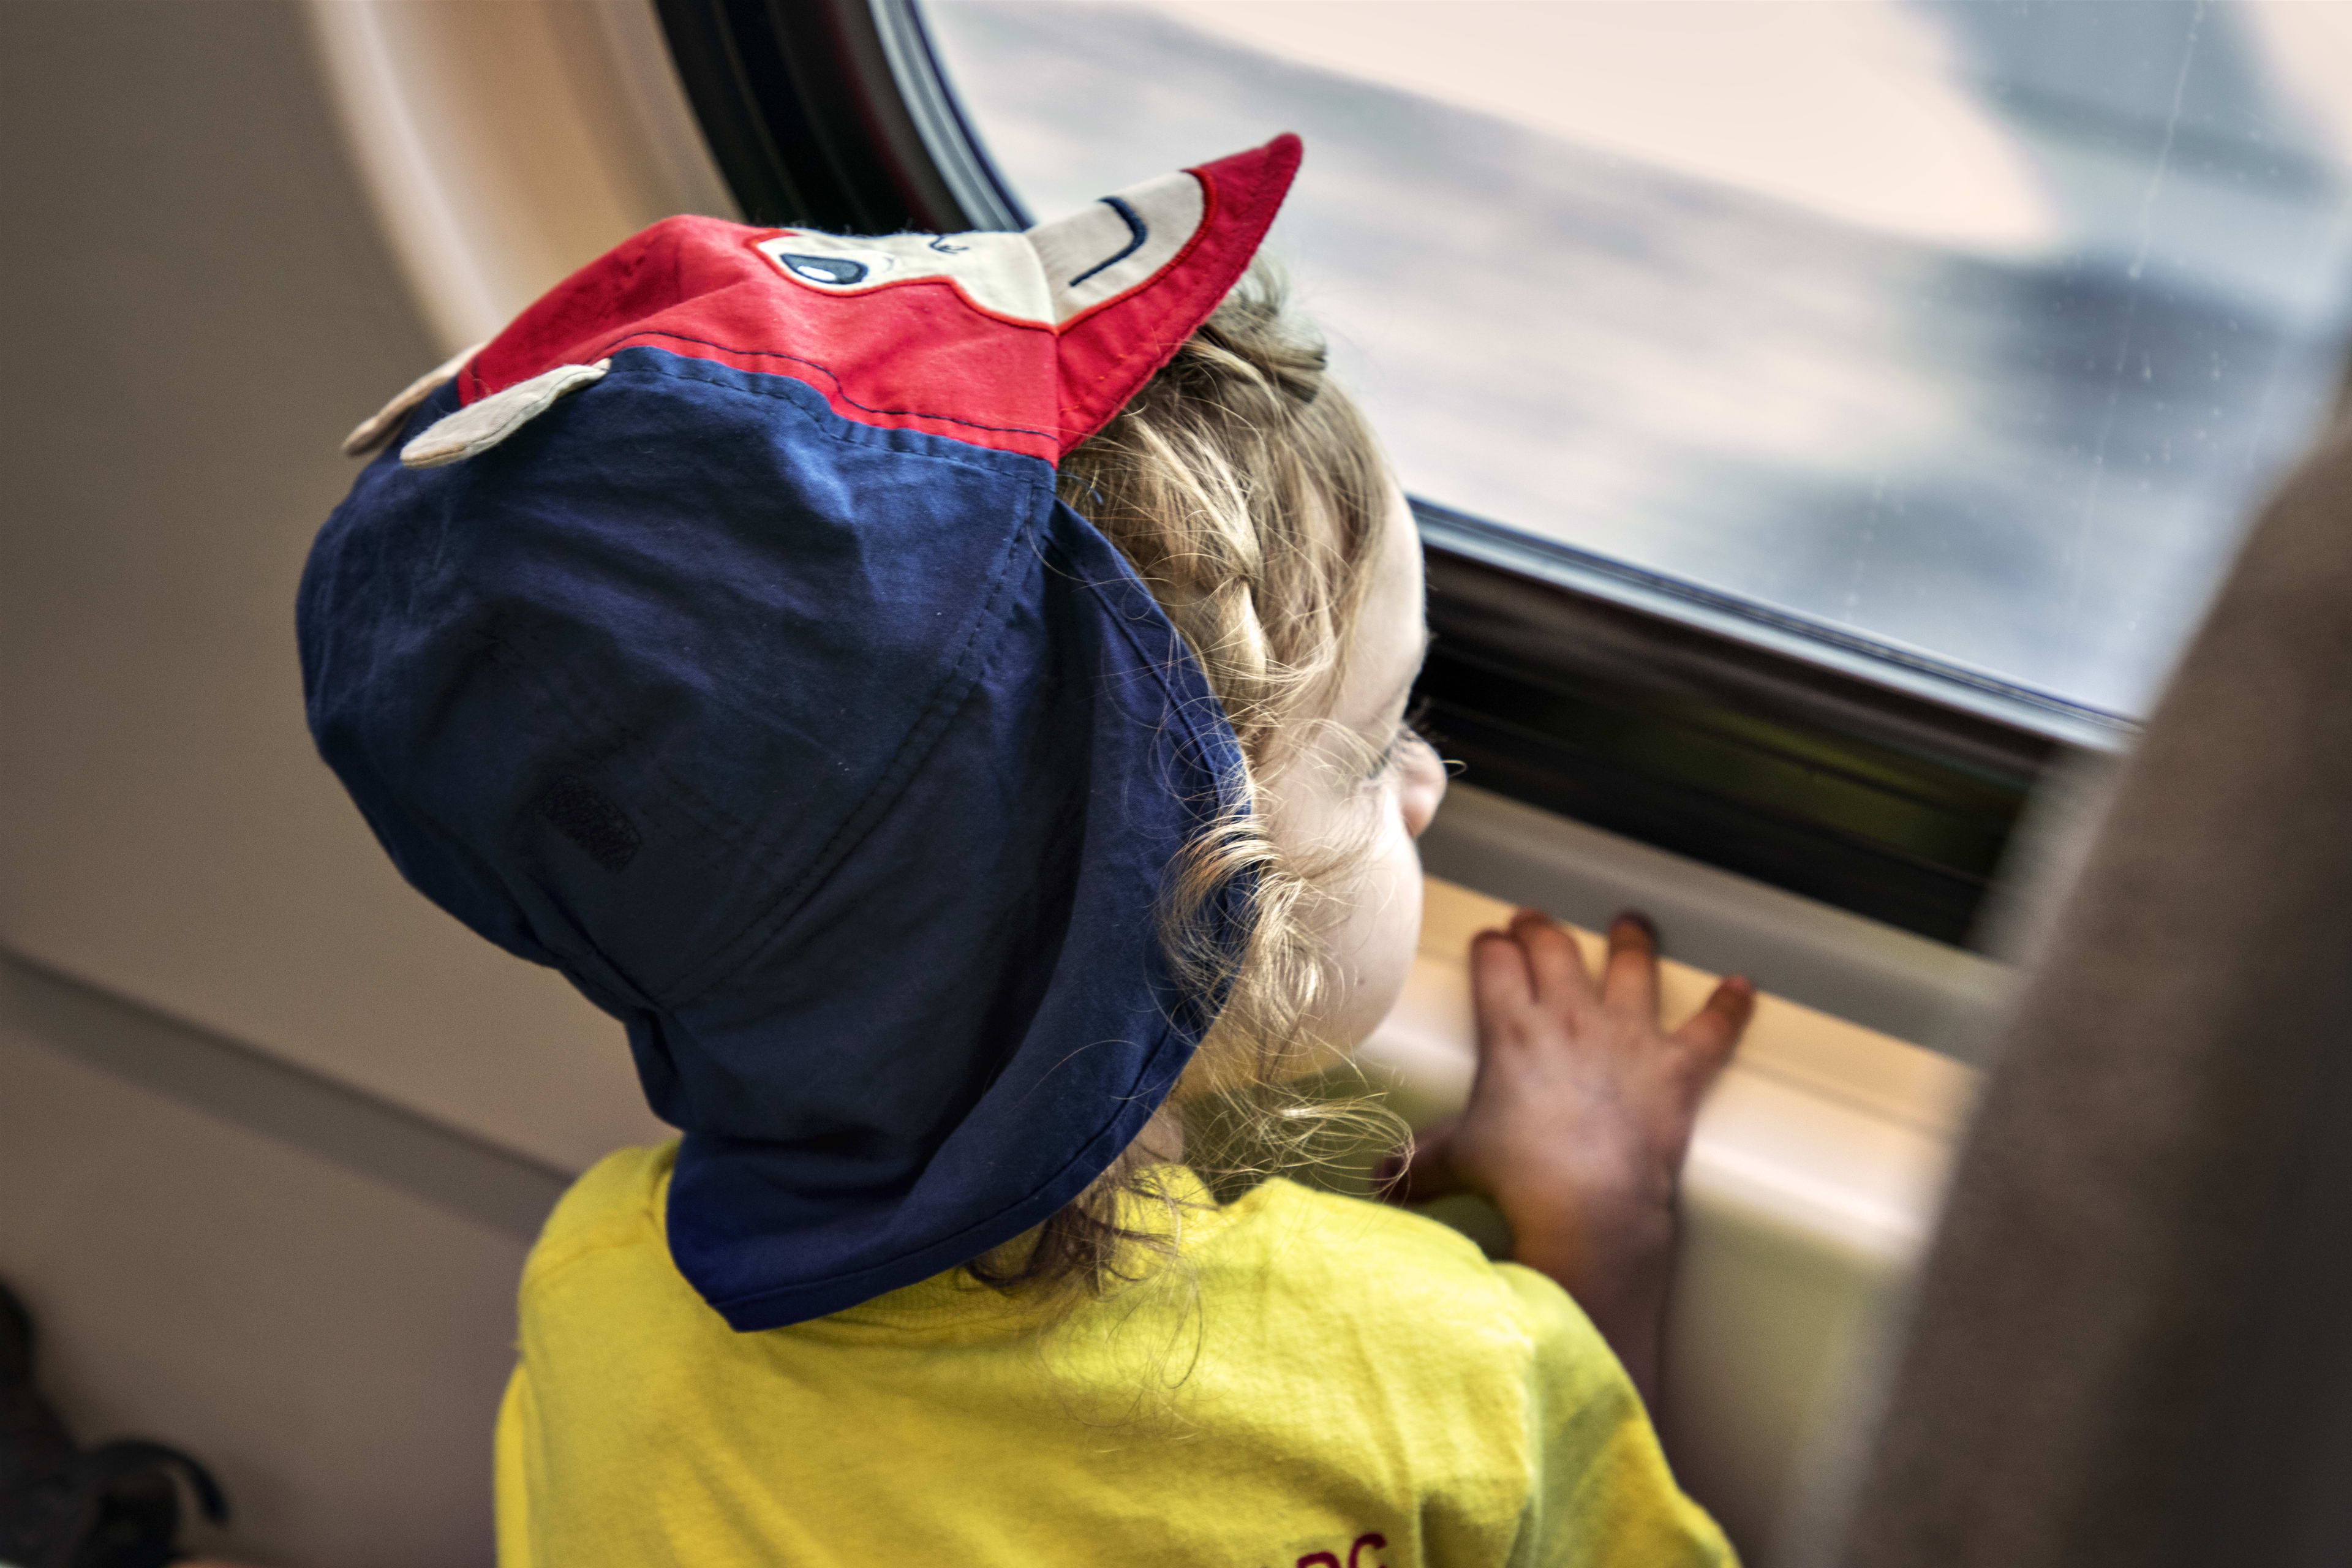 A young child looks out of a train window.